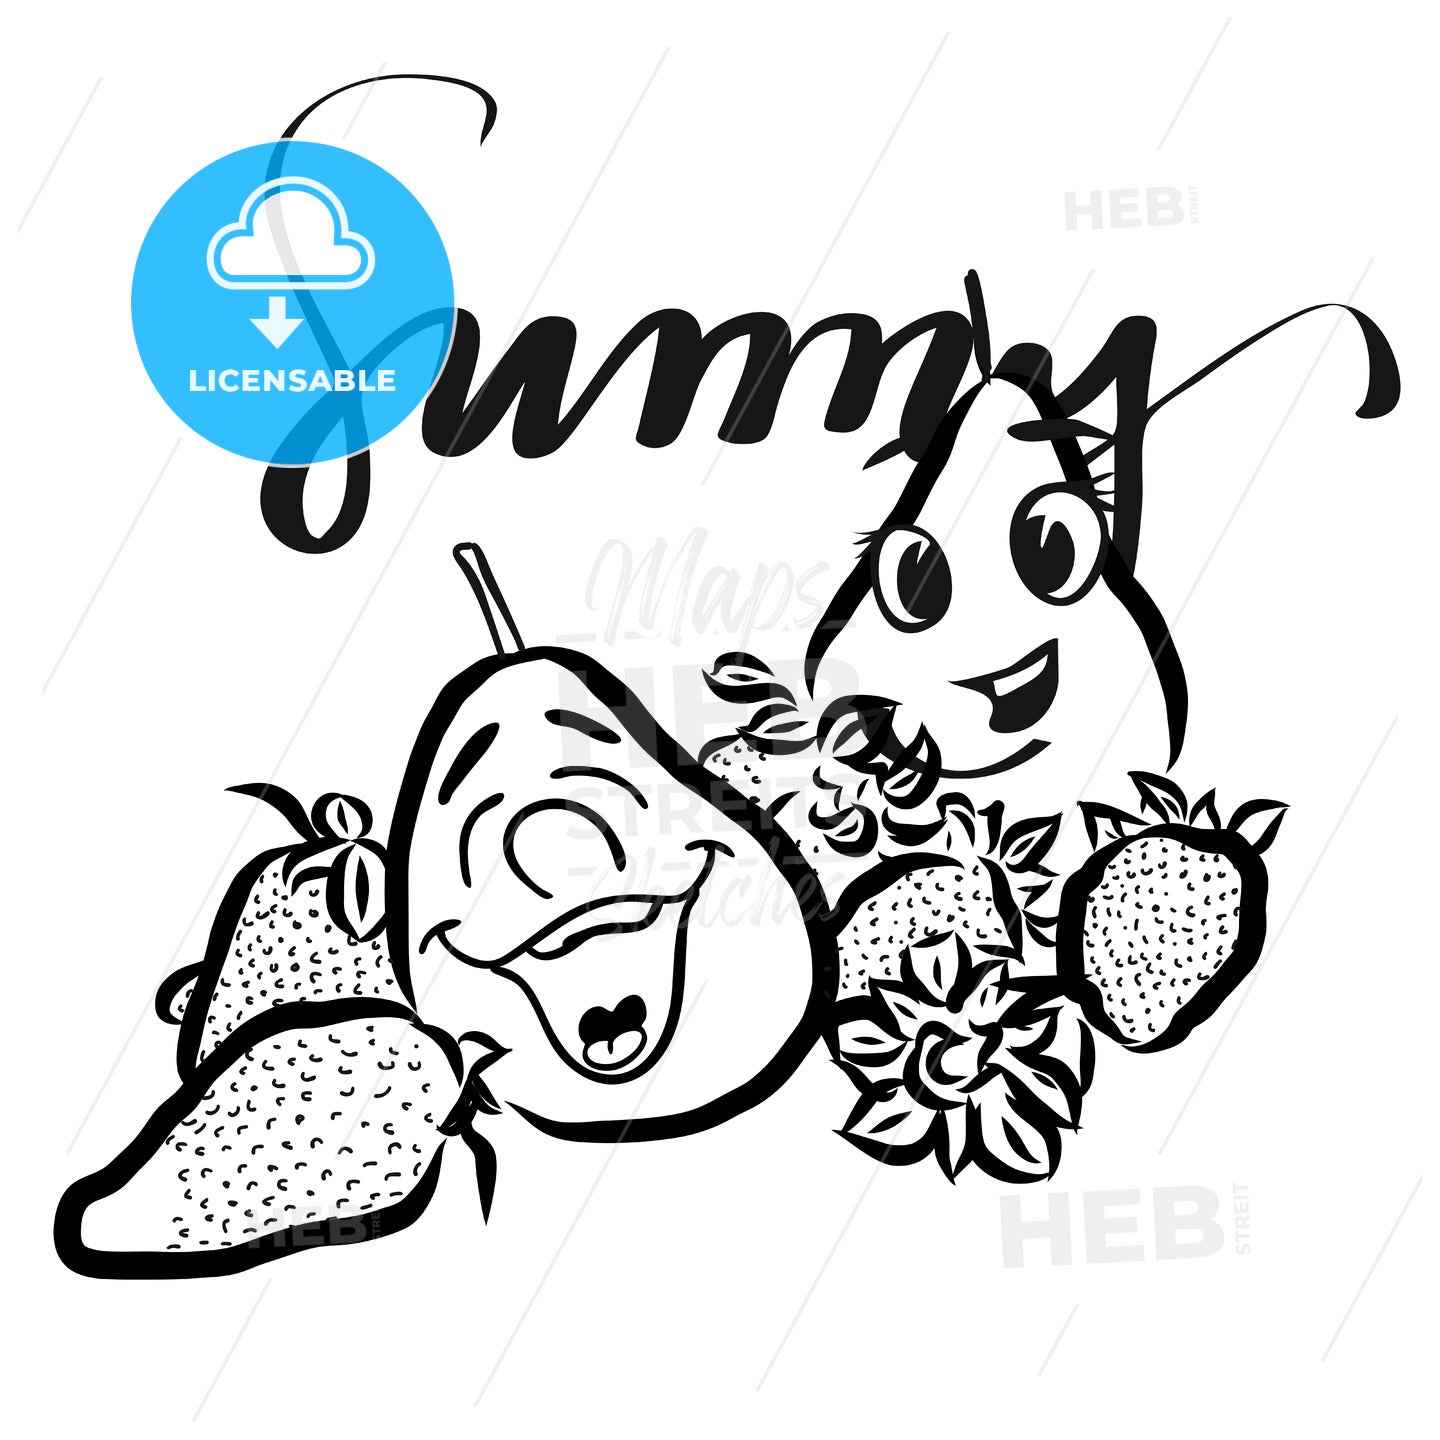 Sunny laughing Pears with Headline – instant download